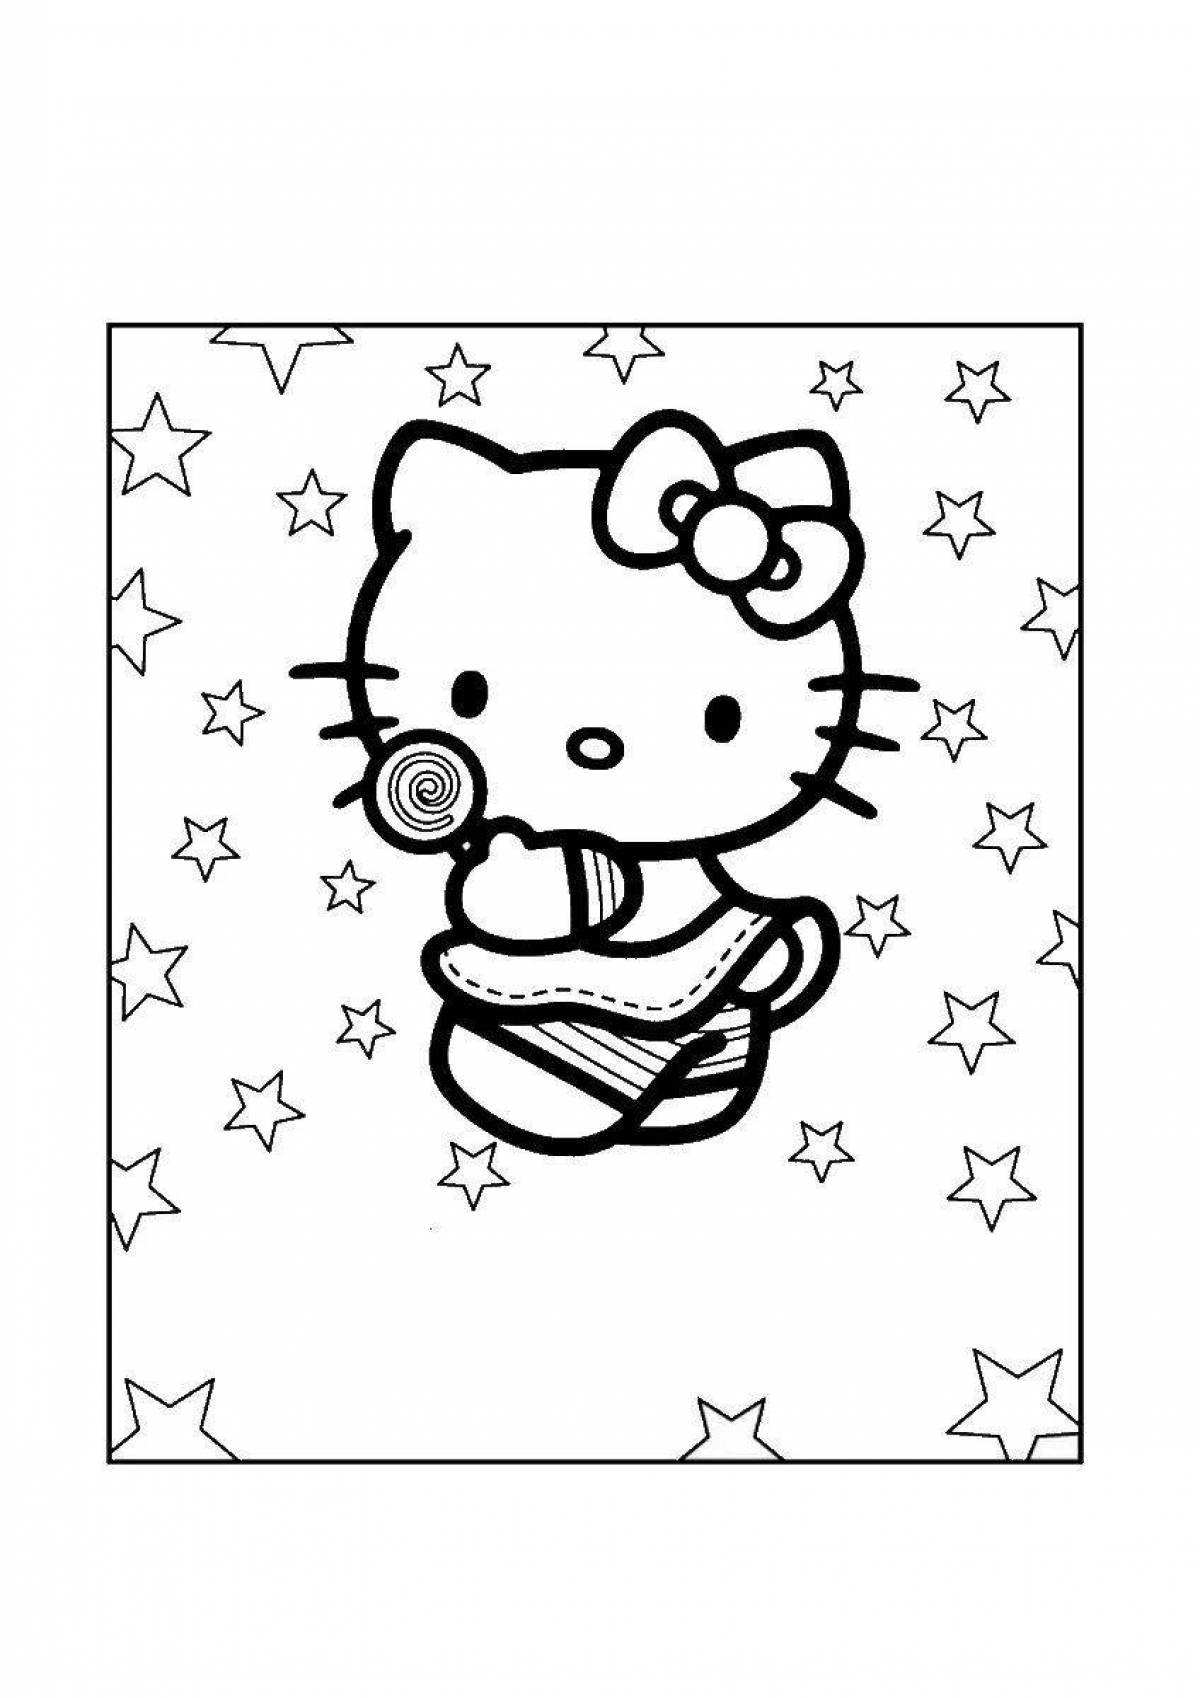 Coloring book glowing hello kitty stickers